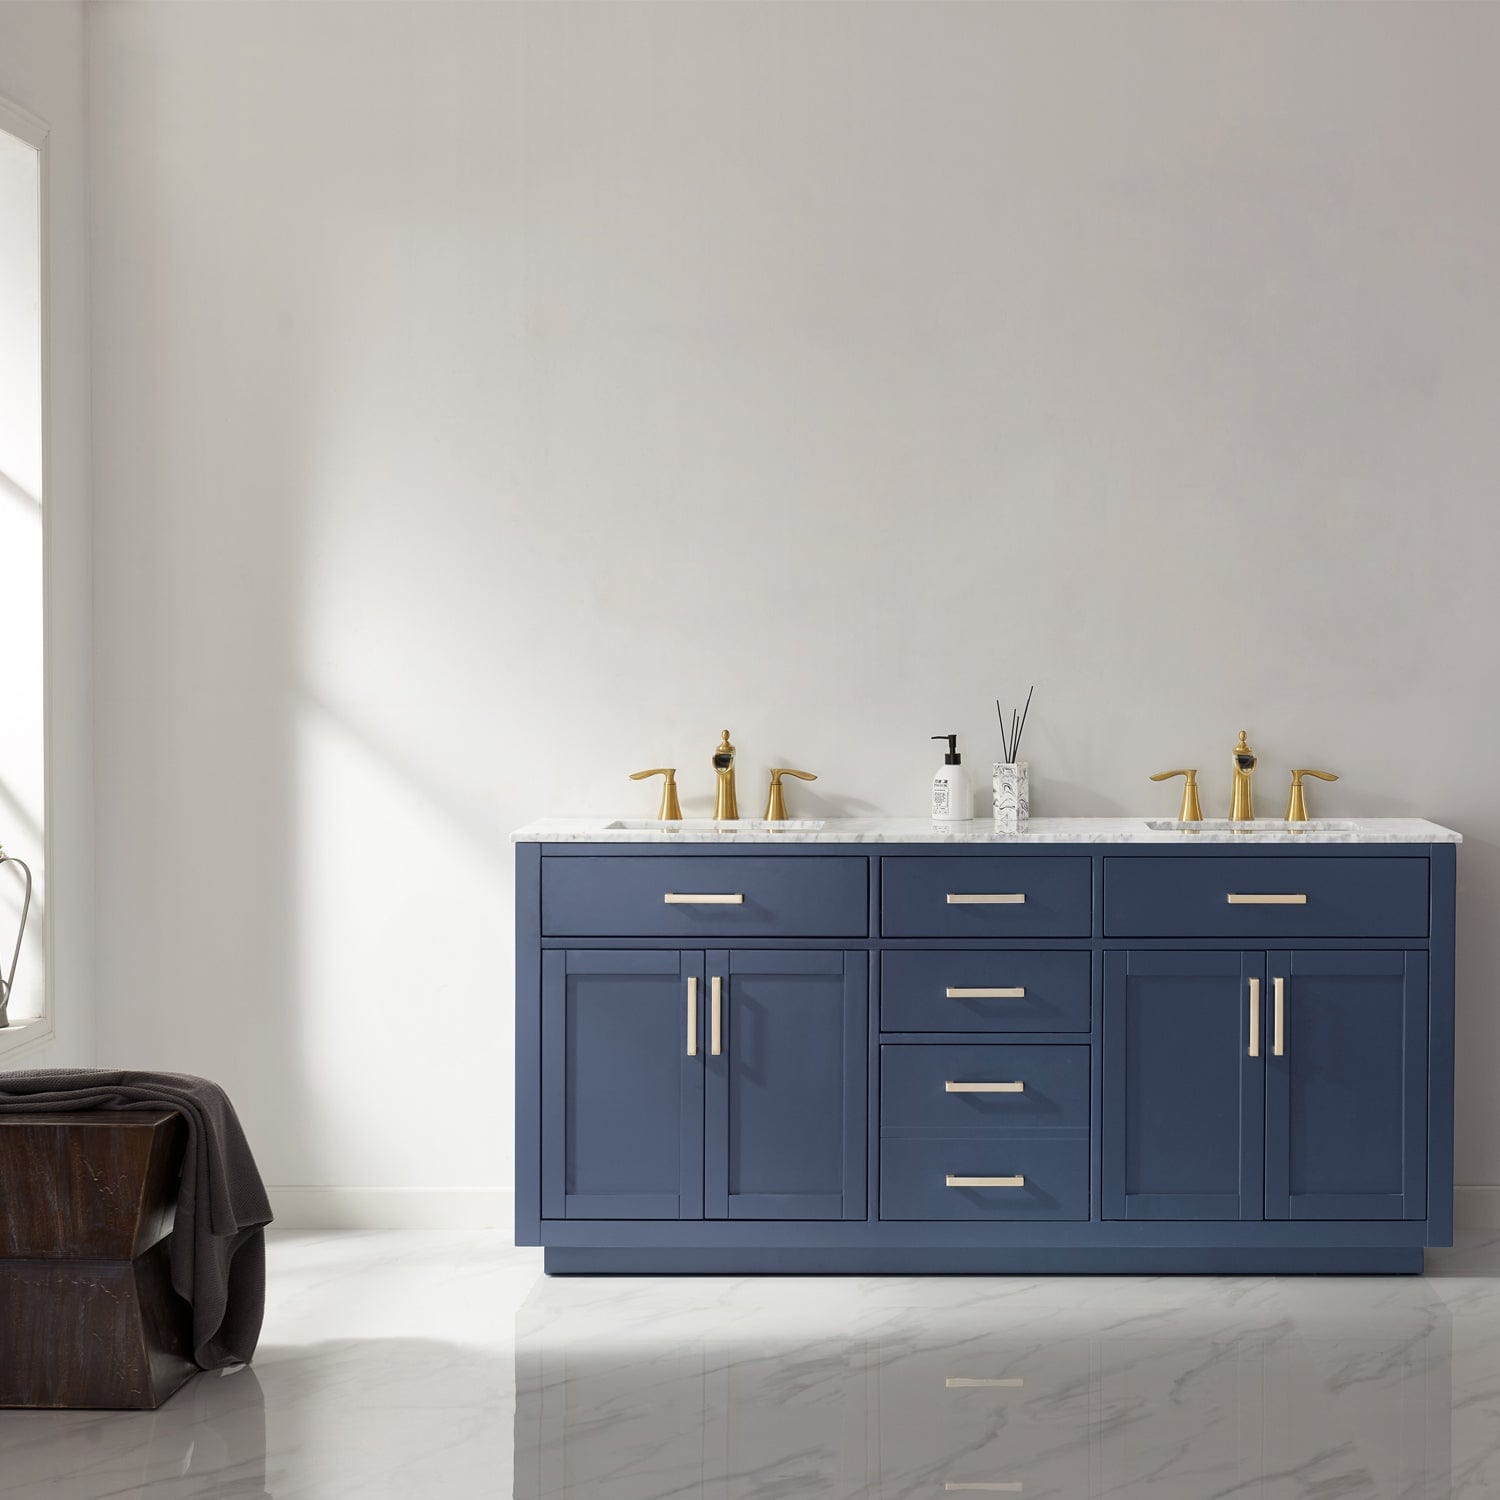 Altair Ivy 72" Double Bathroom Vanity Set in Royal Blue and Carrara White Marble Countertop without Mirror 531072-RB-CA-NM - Molaix631112971300Vanity531072-RB-CA-NM